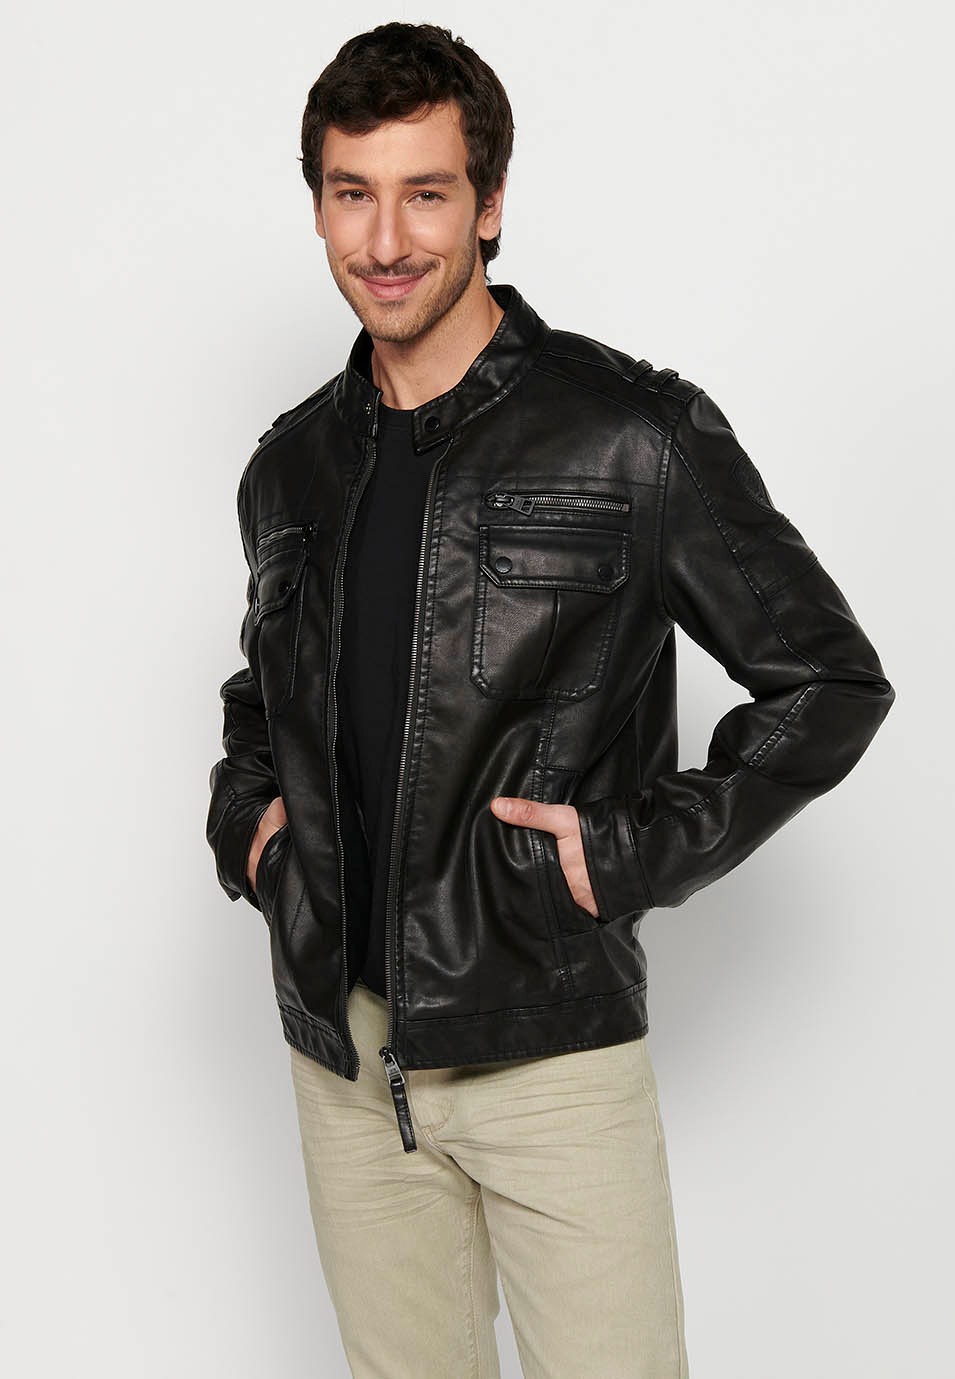 Dark Brown Leather Effect Jacket with Front Zipper Closure and Round Neck for Men 7